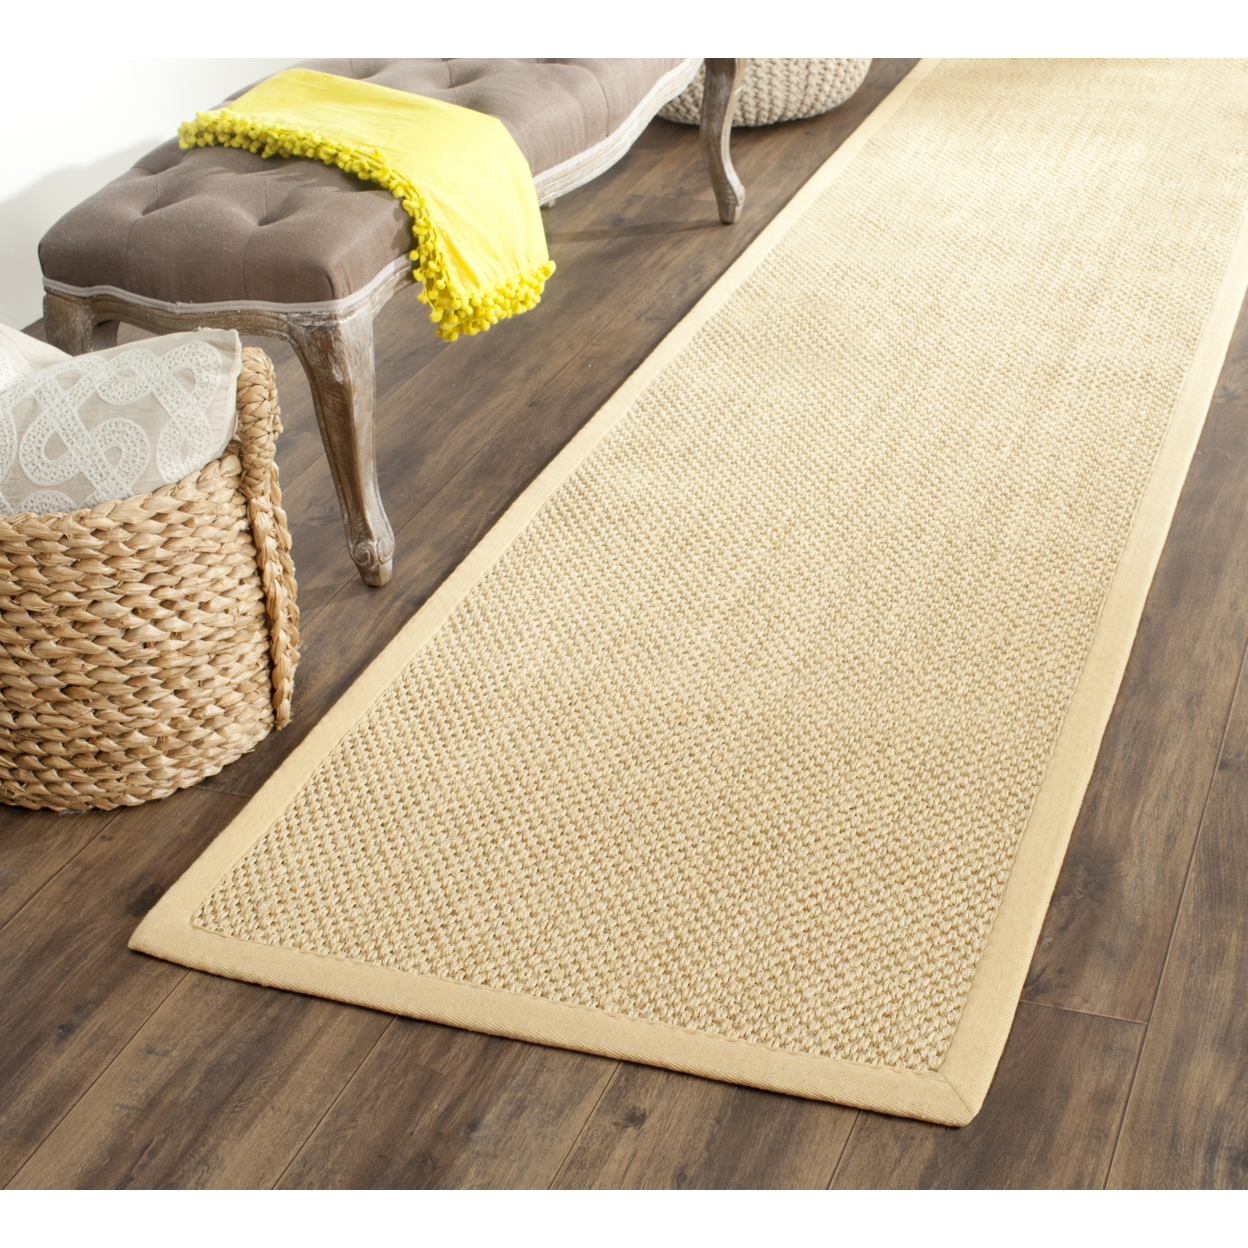 SAFAVIEH Natural Fiber Collection NF443A Maize/Wheat Rug - 2' 6 X 4'